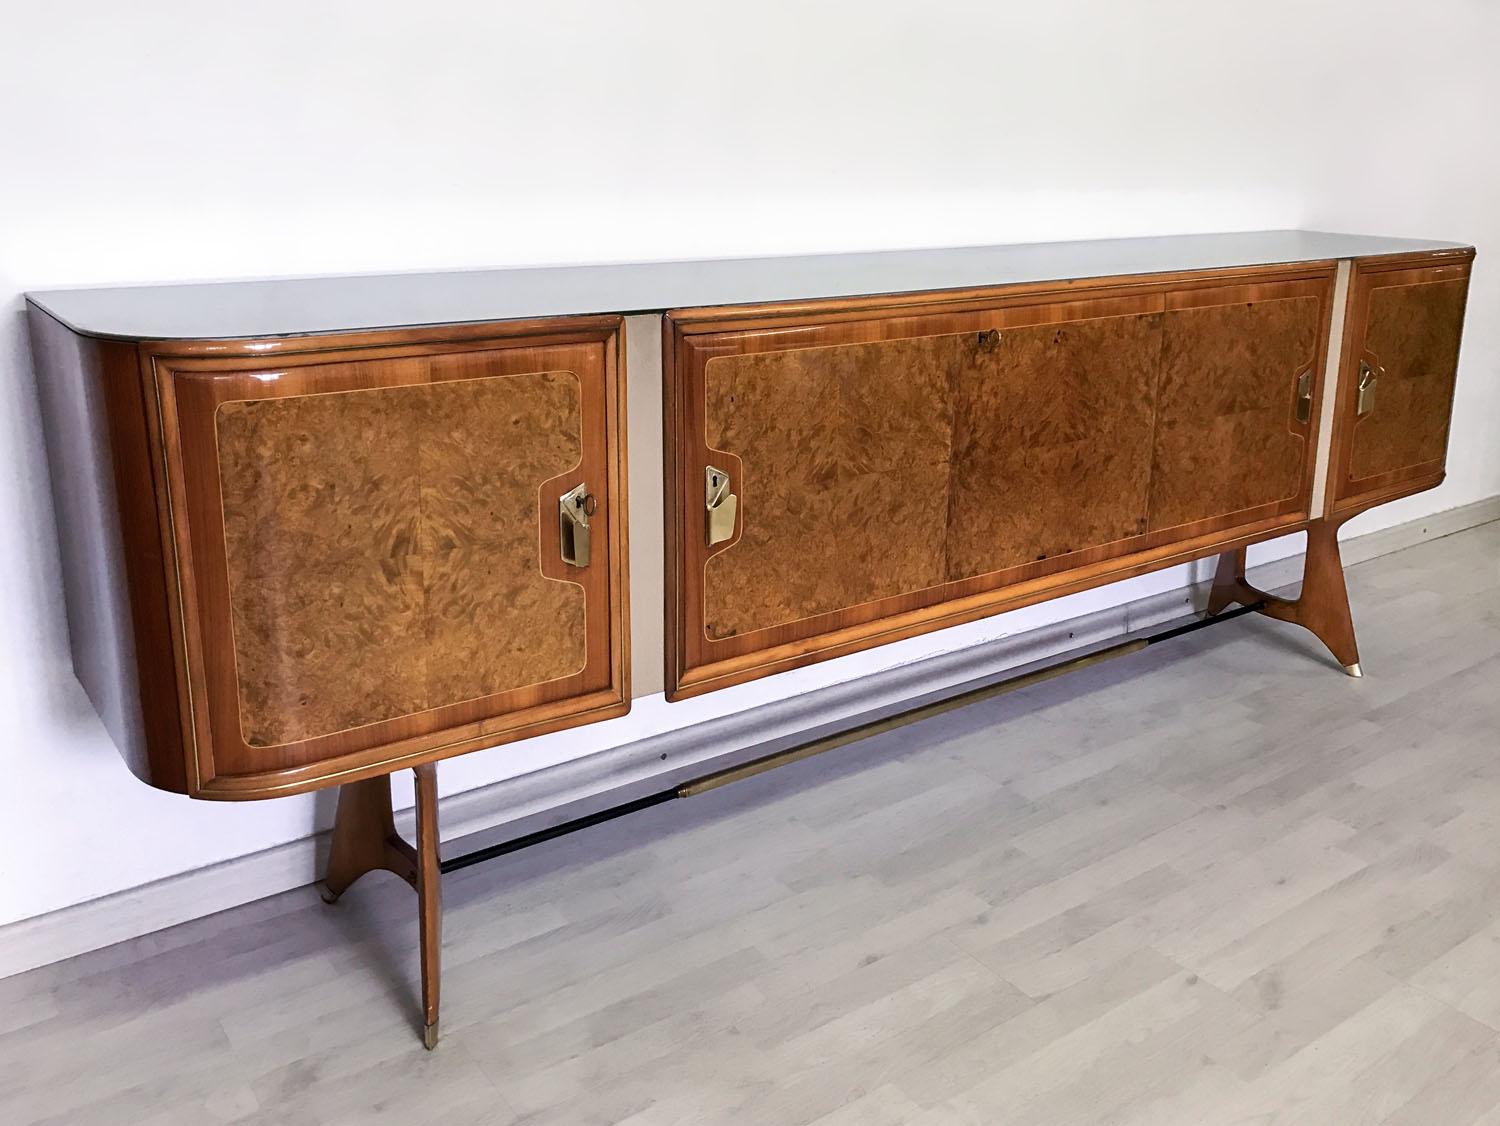 Rare Italian sideboard six-doors designed by Vittorio Dassi in the 1950s.
It's a very fine item made of precious materials as well as the six-doors of birch briar root, finished with brass handles.
Its base is made of solid wood legs finished with